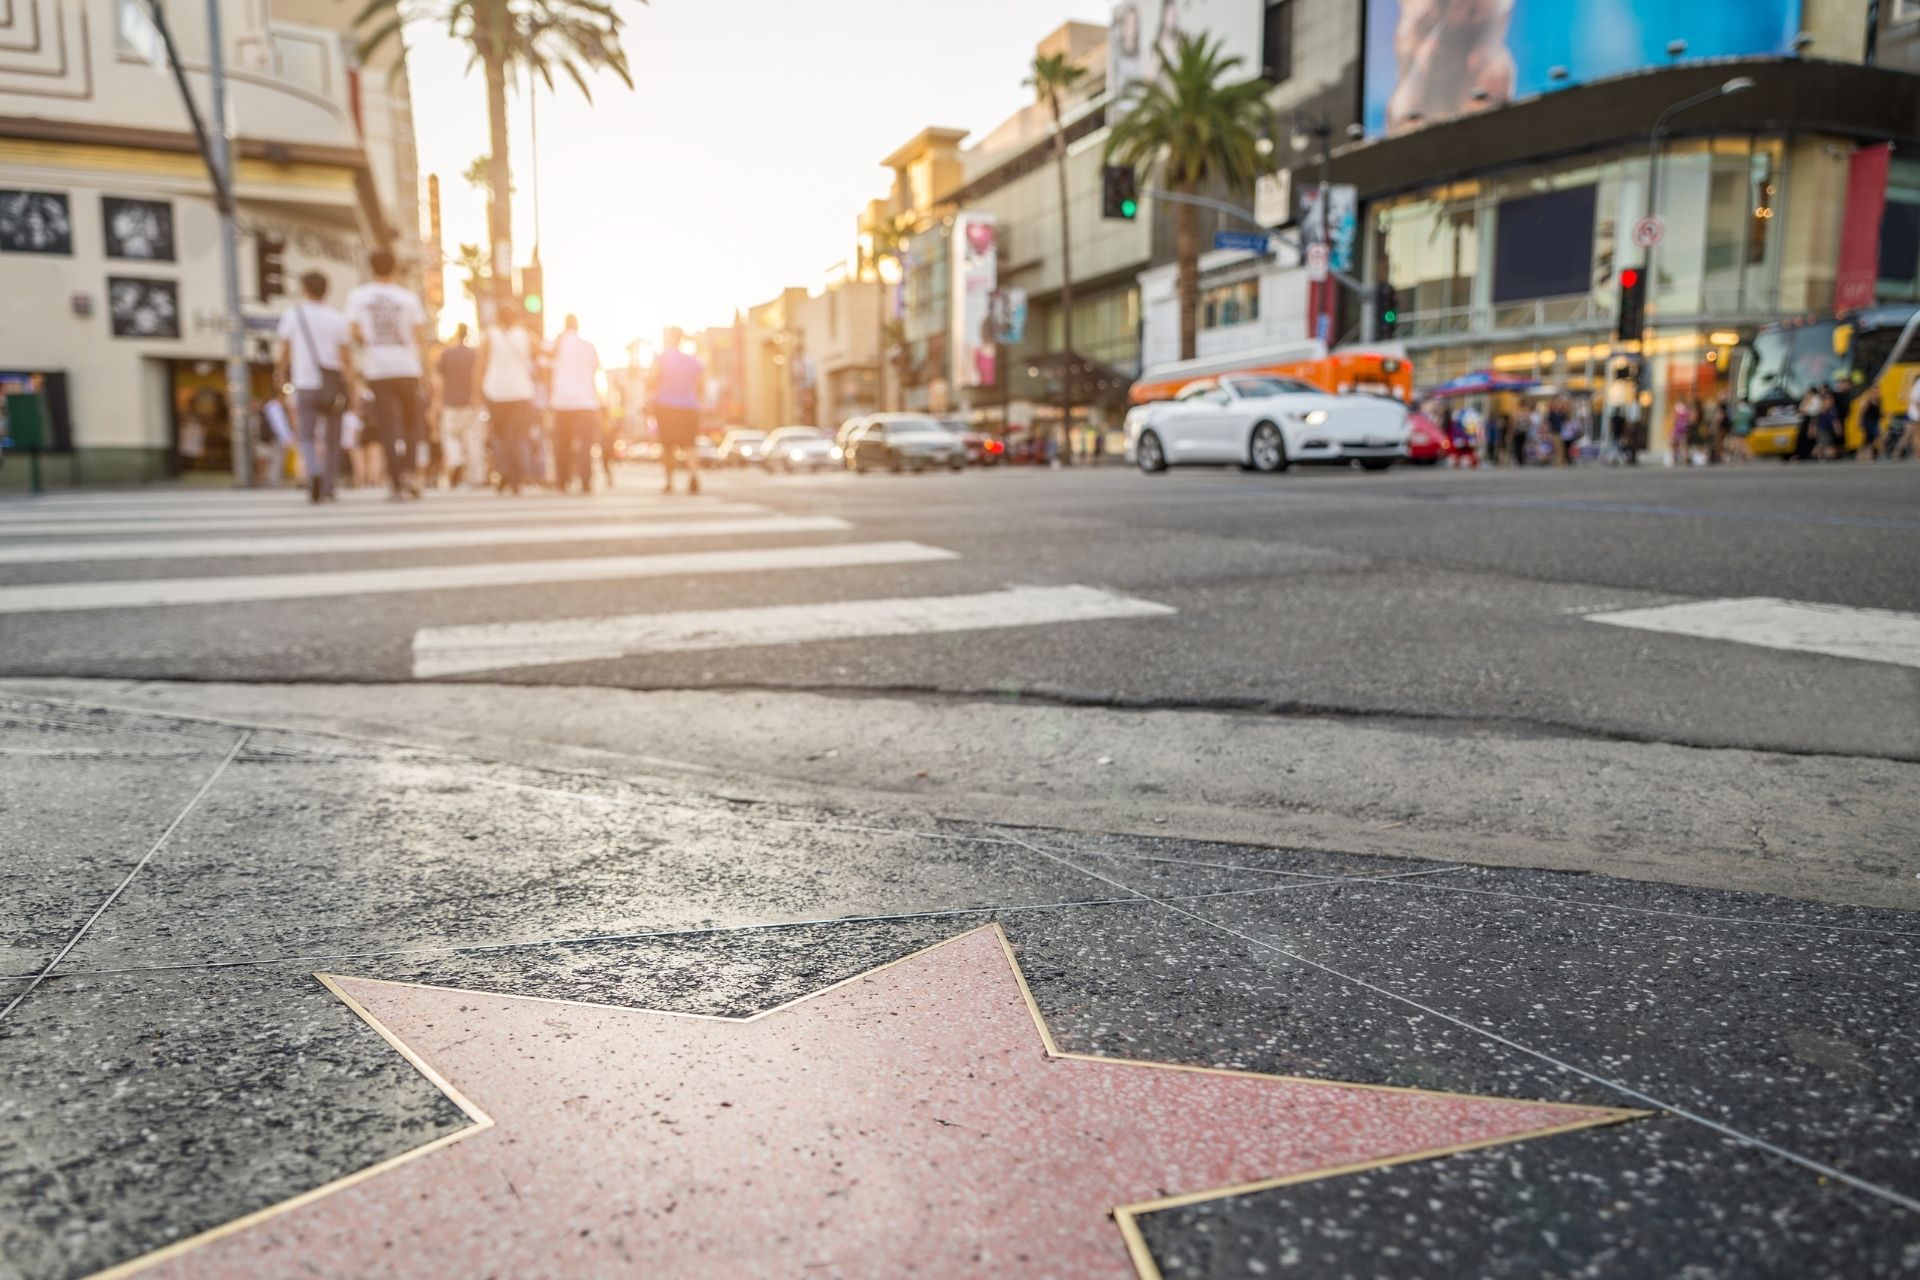 Where to stay in Hollywood